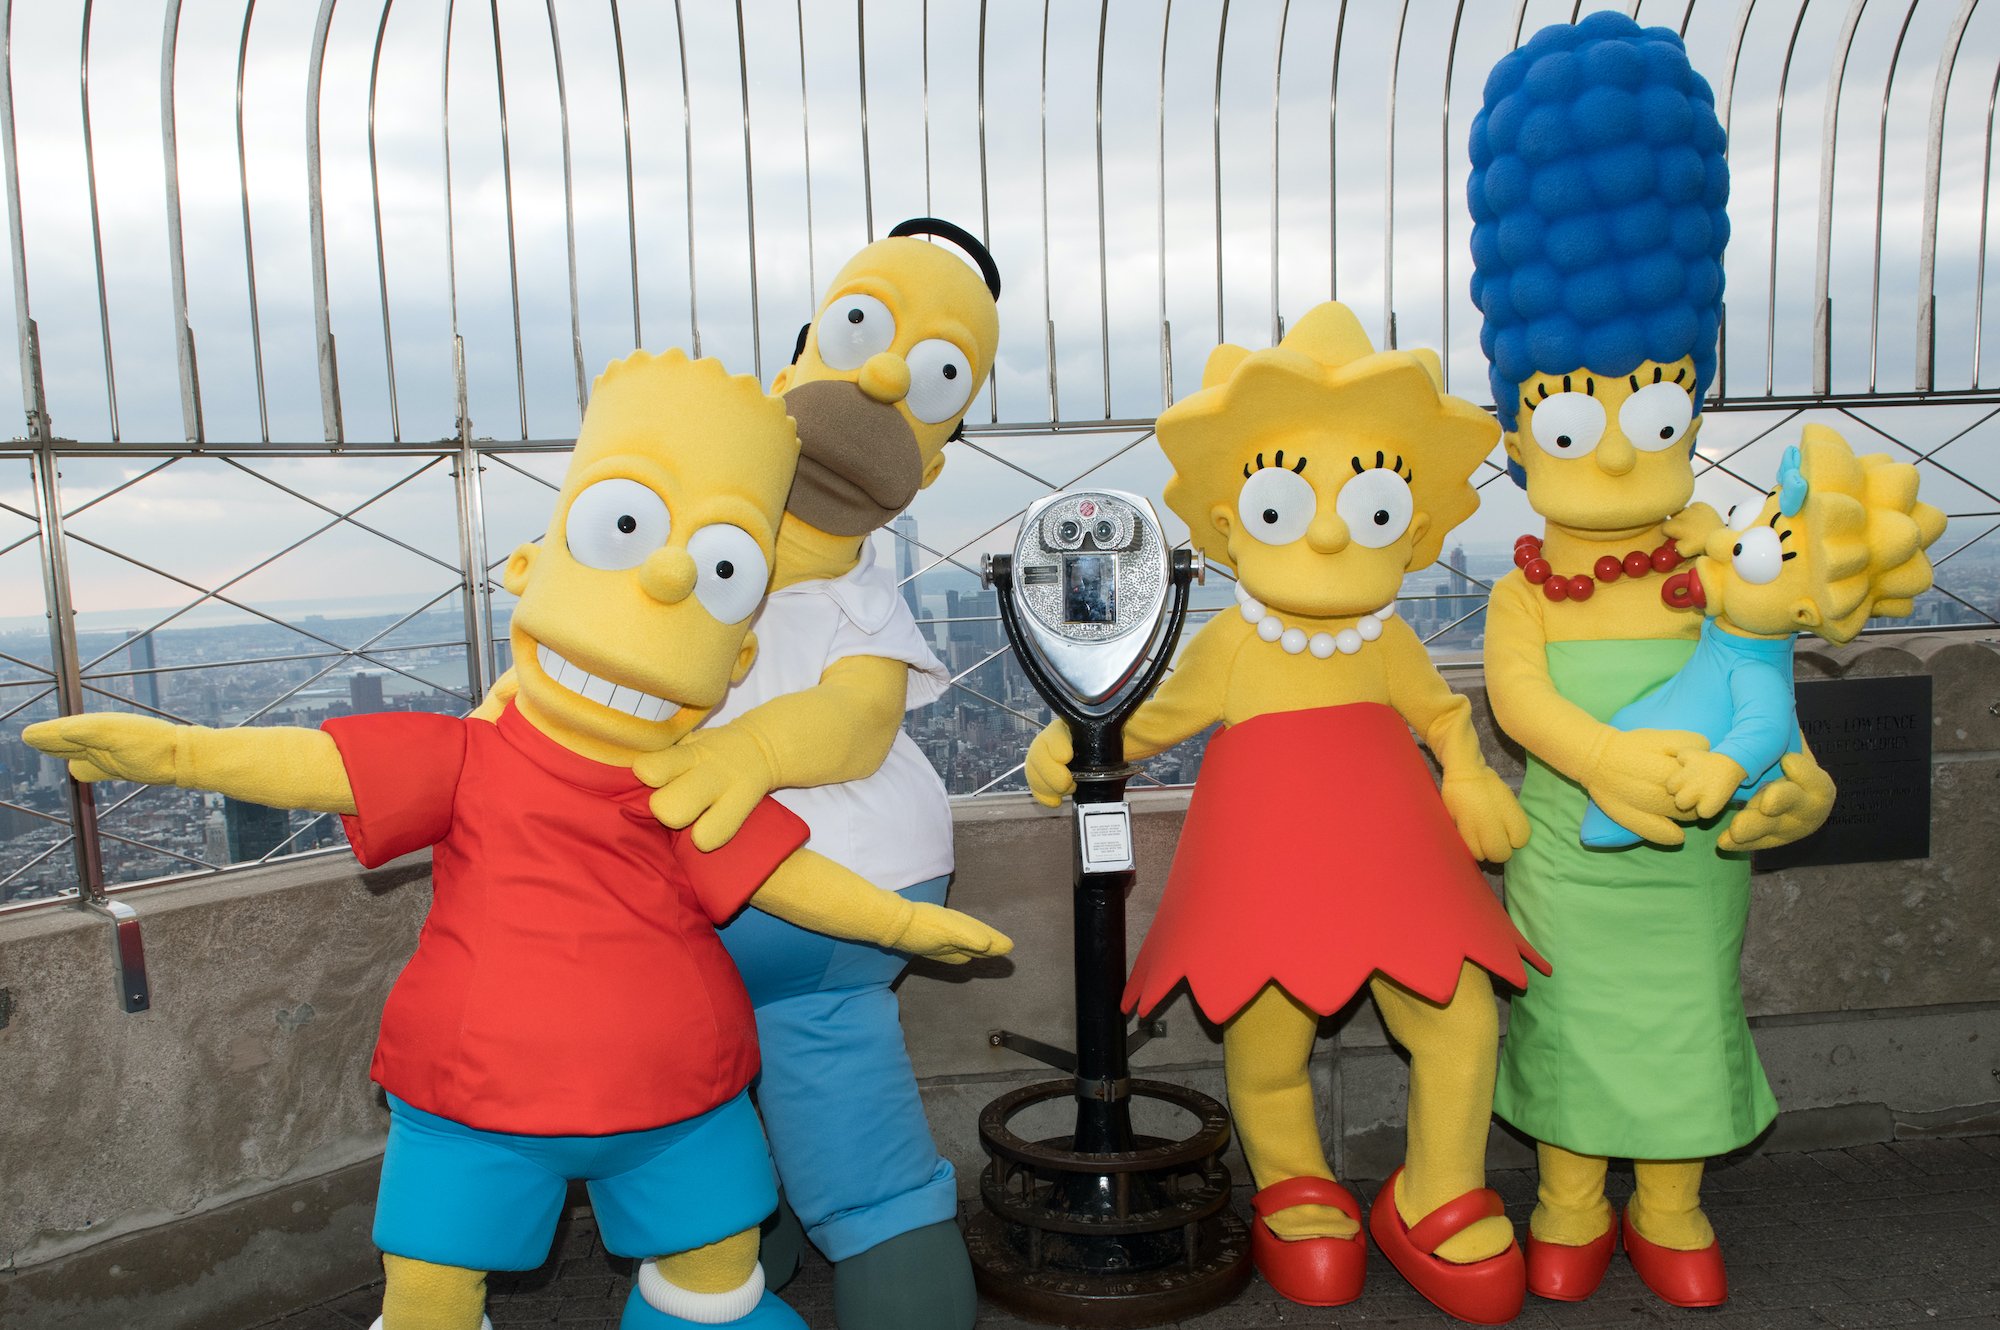 Bart Simpson, Homer Simpson, Lisa Simpson, Marge Simpson and Maggie Simpson visit The Empire State Building